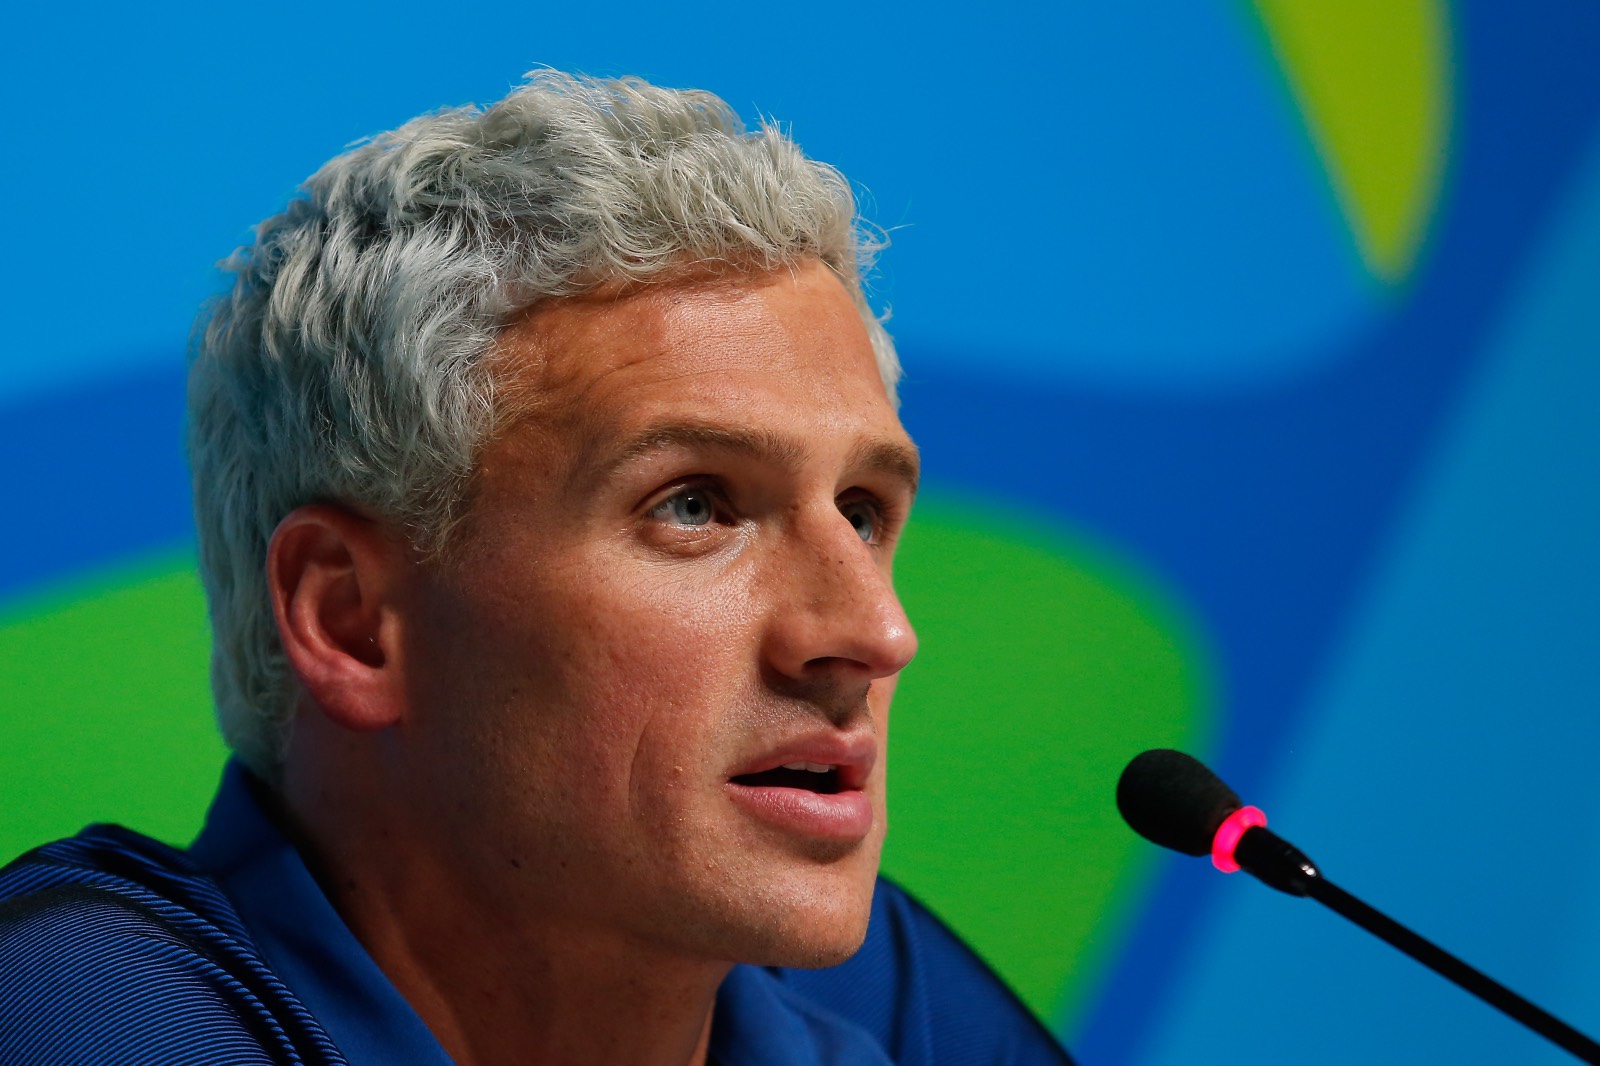 Ryan Lochte of the United States attends a press conference in the Main Press Center on Day 7 of the Rio Olympics on August 12, 2016 in Rio de Janeiro, Brazil. | Matt Hazlett/Getty Images